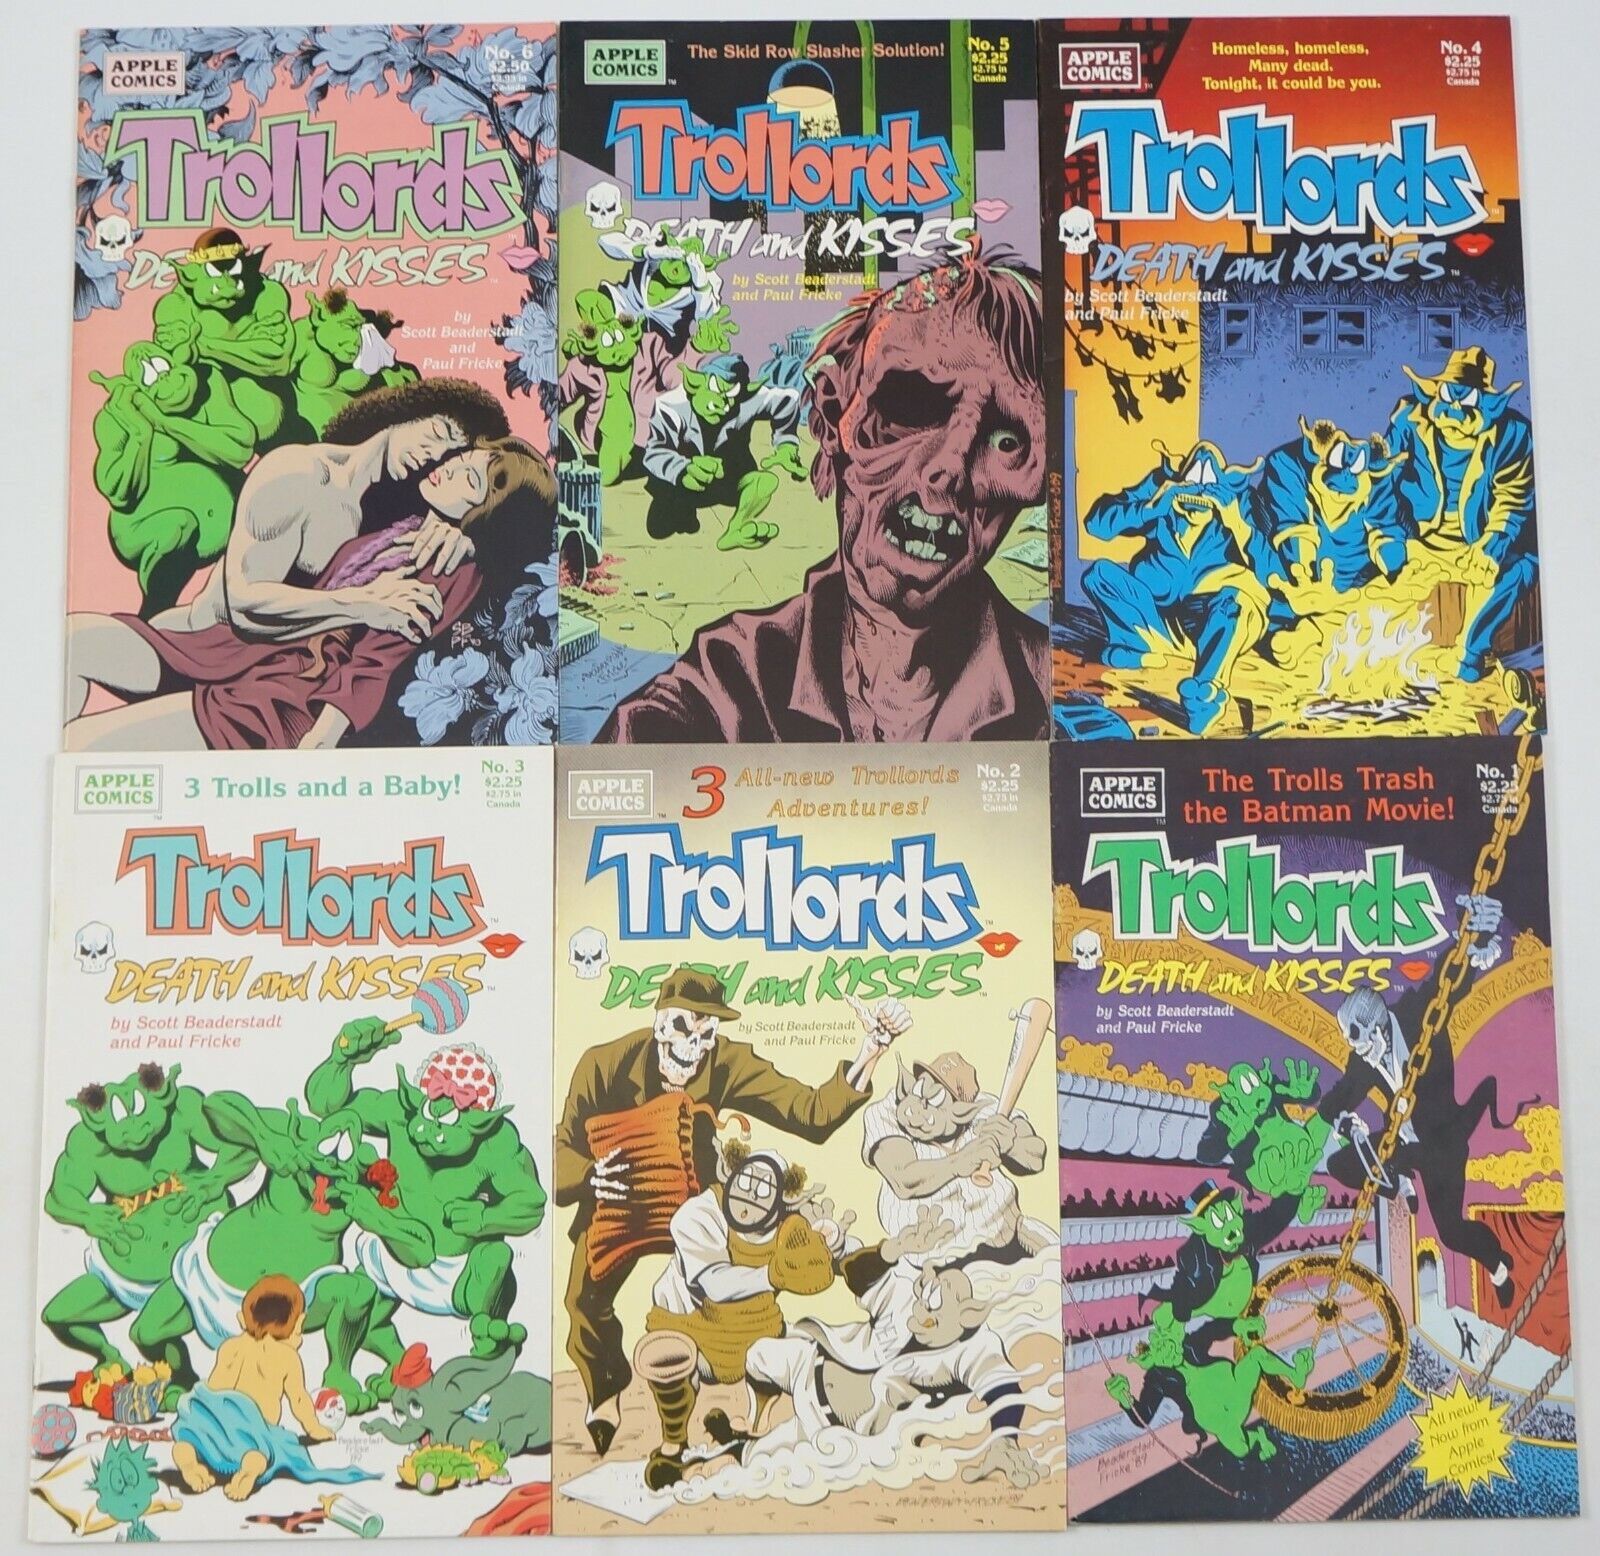 Trollords: Death And Kisses #1-6 VF/NM complete series Beaderstadt Fricke Apple